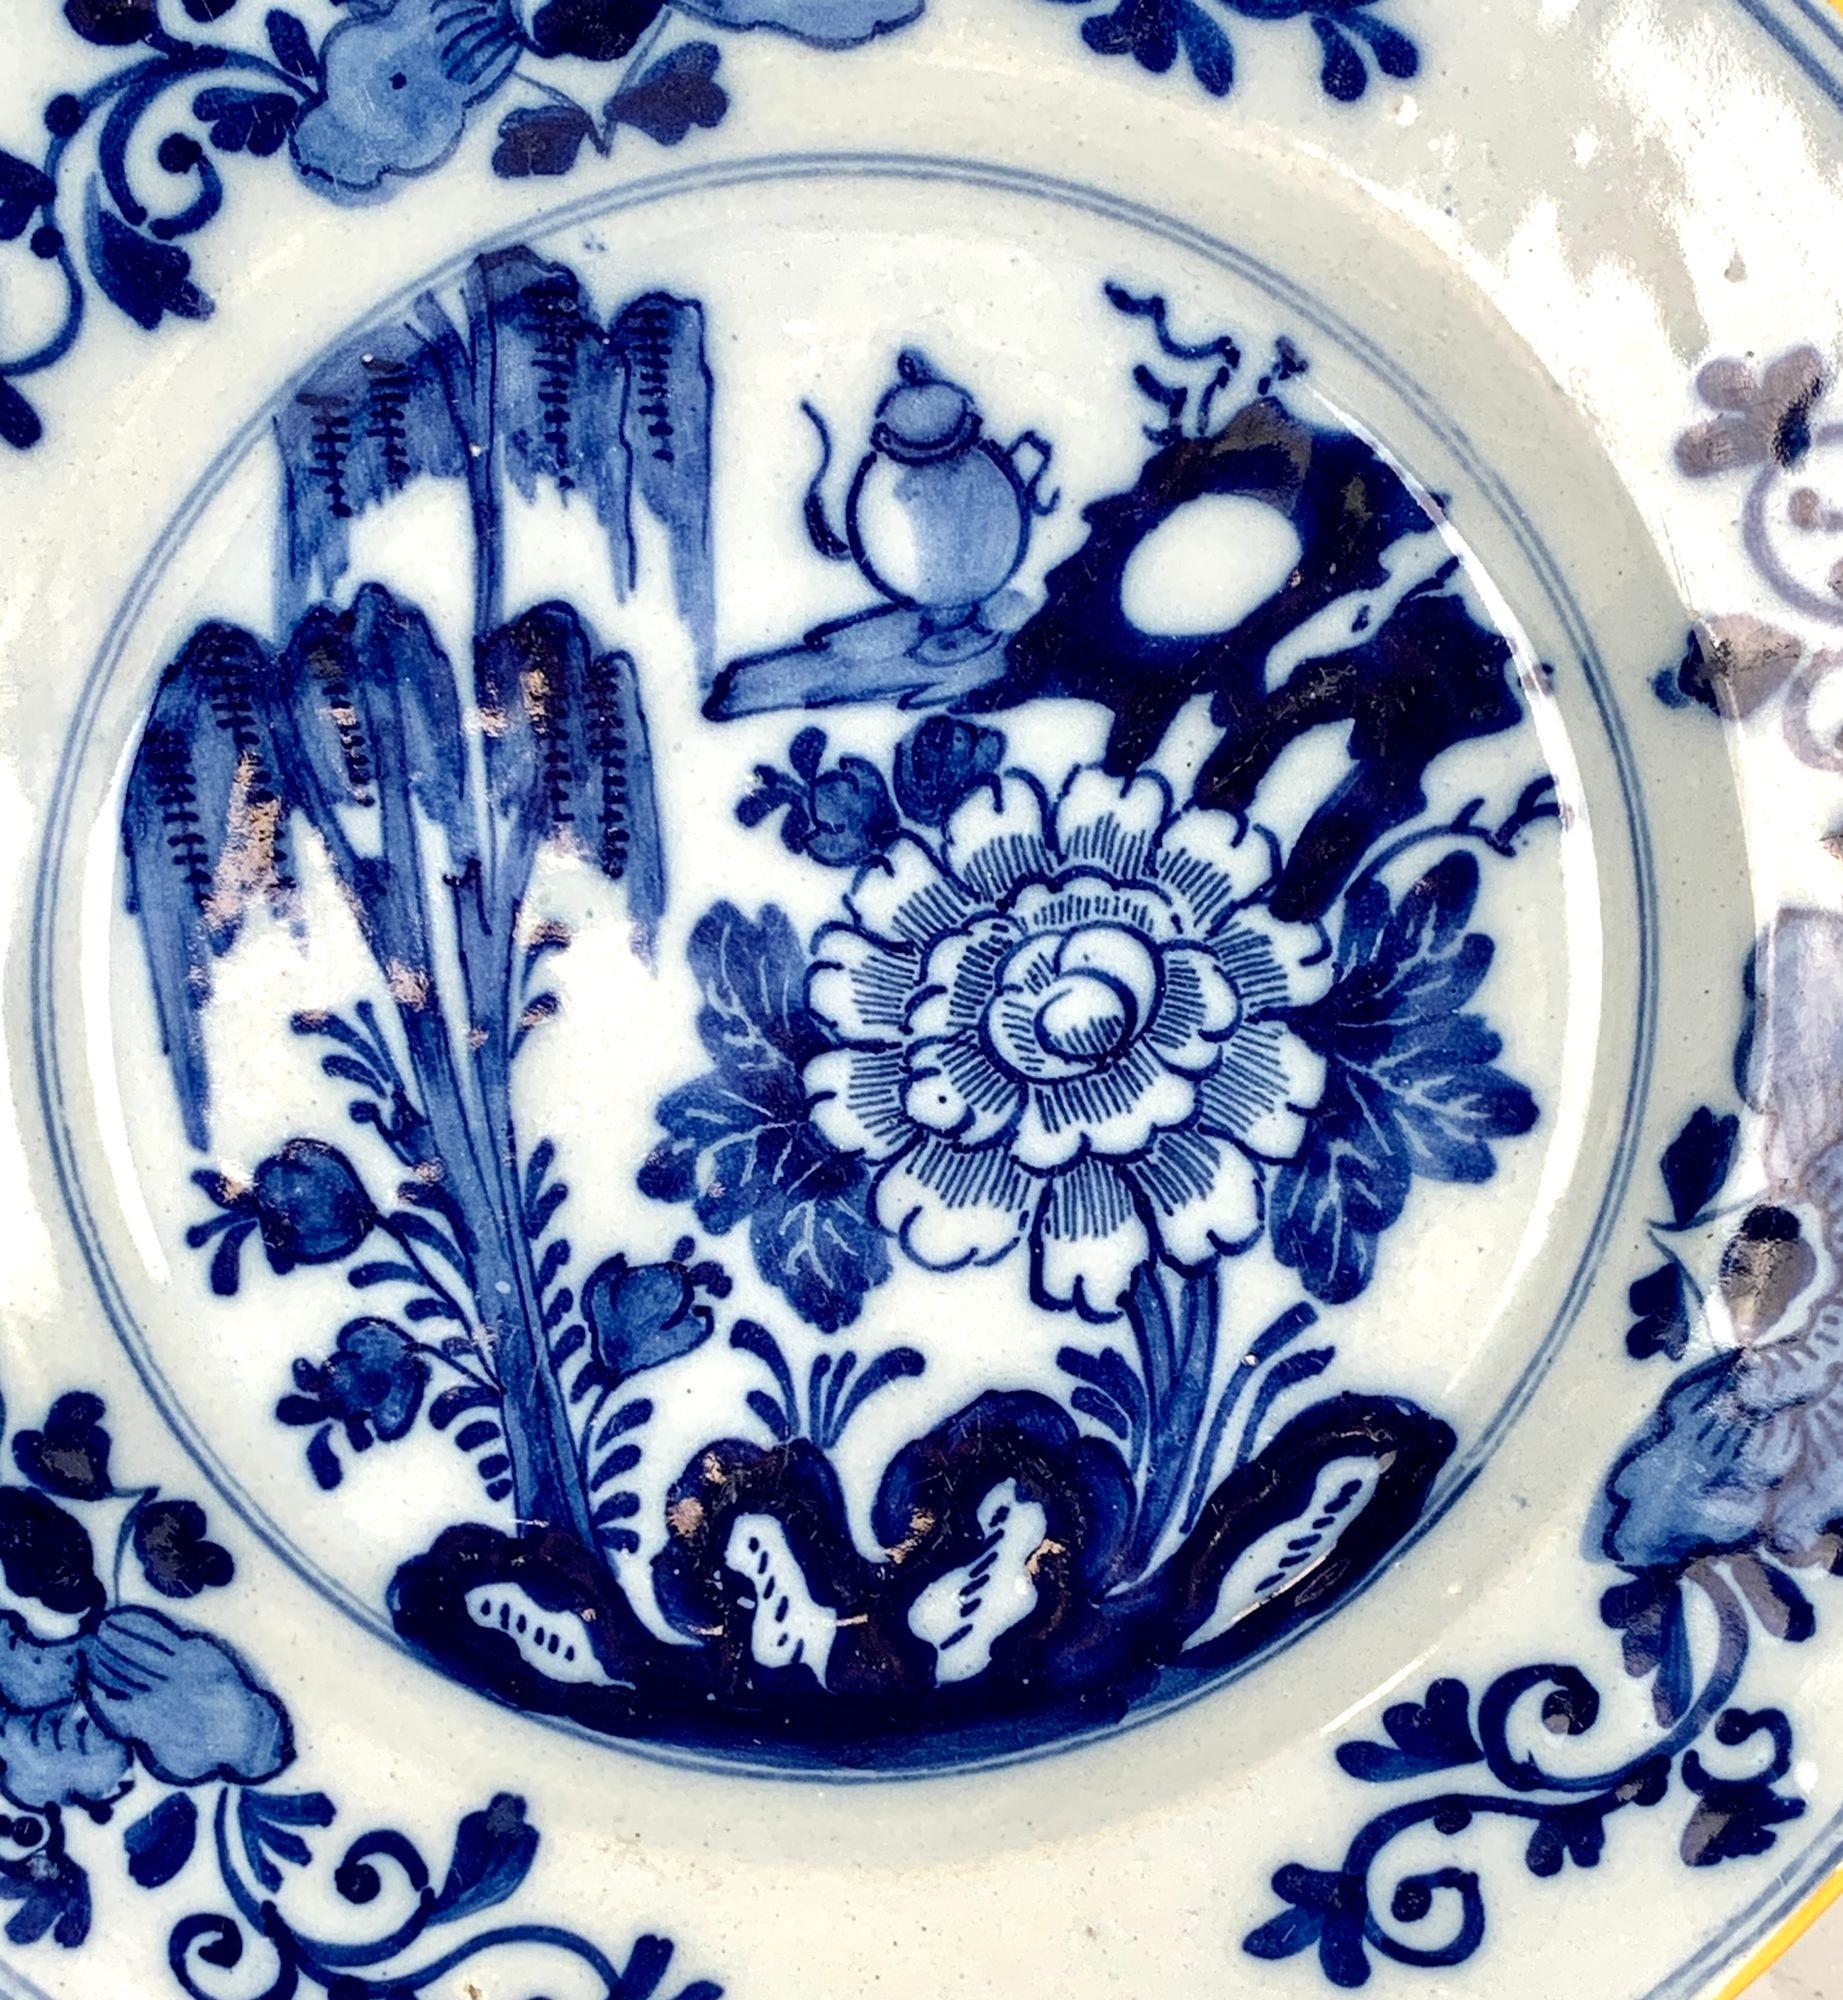 This blue and white Delft plate was hand painted circa 1800 in the Netherlands.
Provenance: On the reverse is the mark of De Porceleyene Claeuw, 